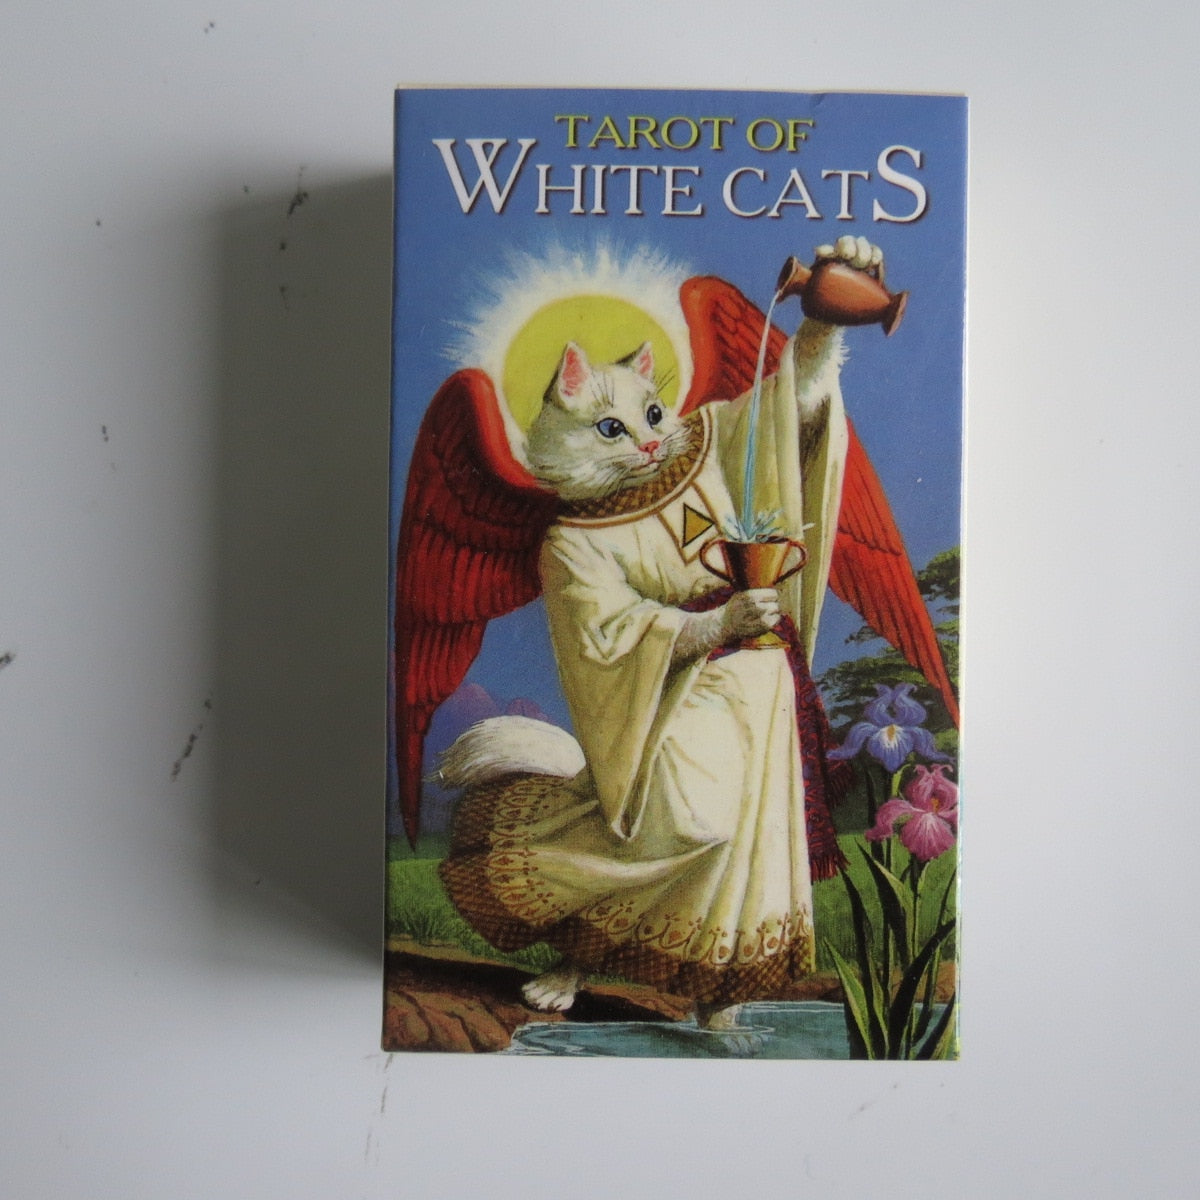 White Cats Beautiful Tarot Oracles Cards For Mysterious Divination Entertainment